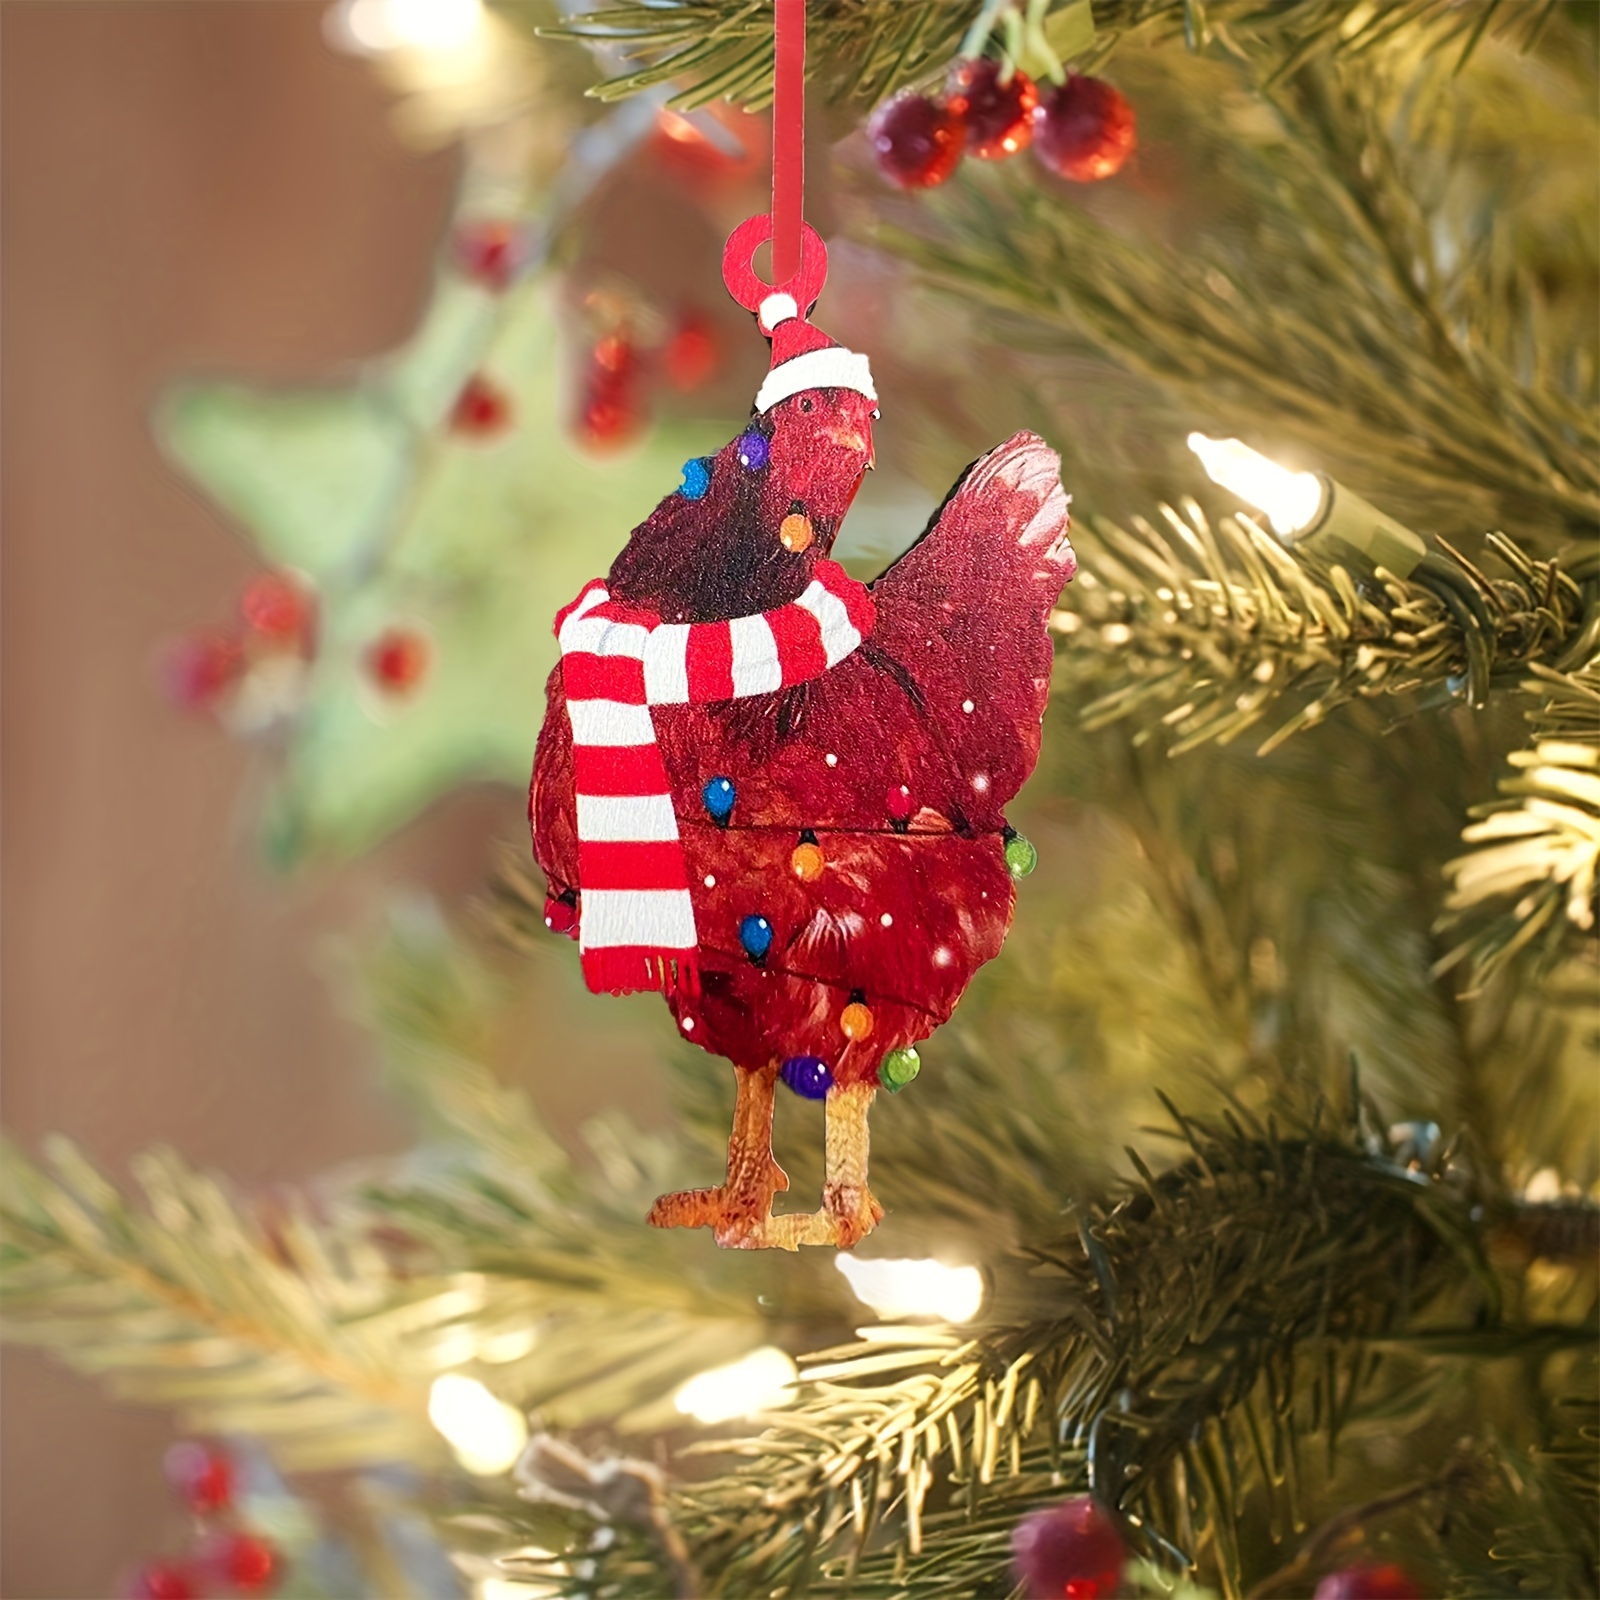 Christmas Tree Ornaments Decorations Turkey Car Xmas Hanging Decoration  Ornament Little Decorated Unbreakable Gifts Indoor Outdoor for Christmas  Tree